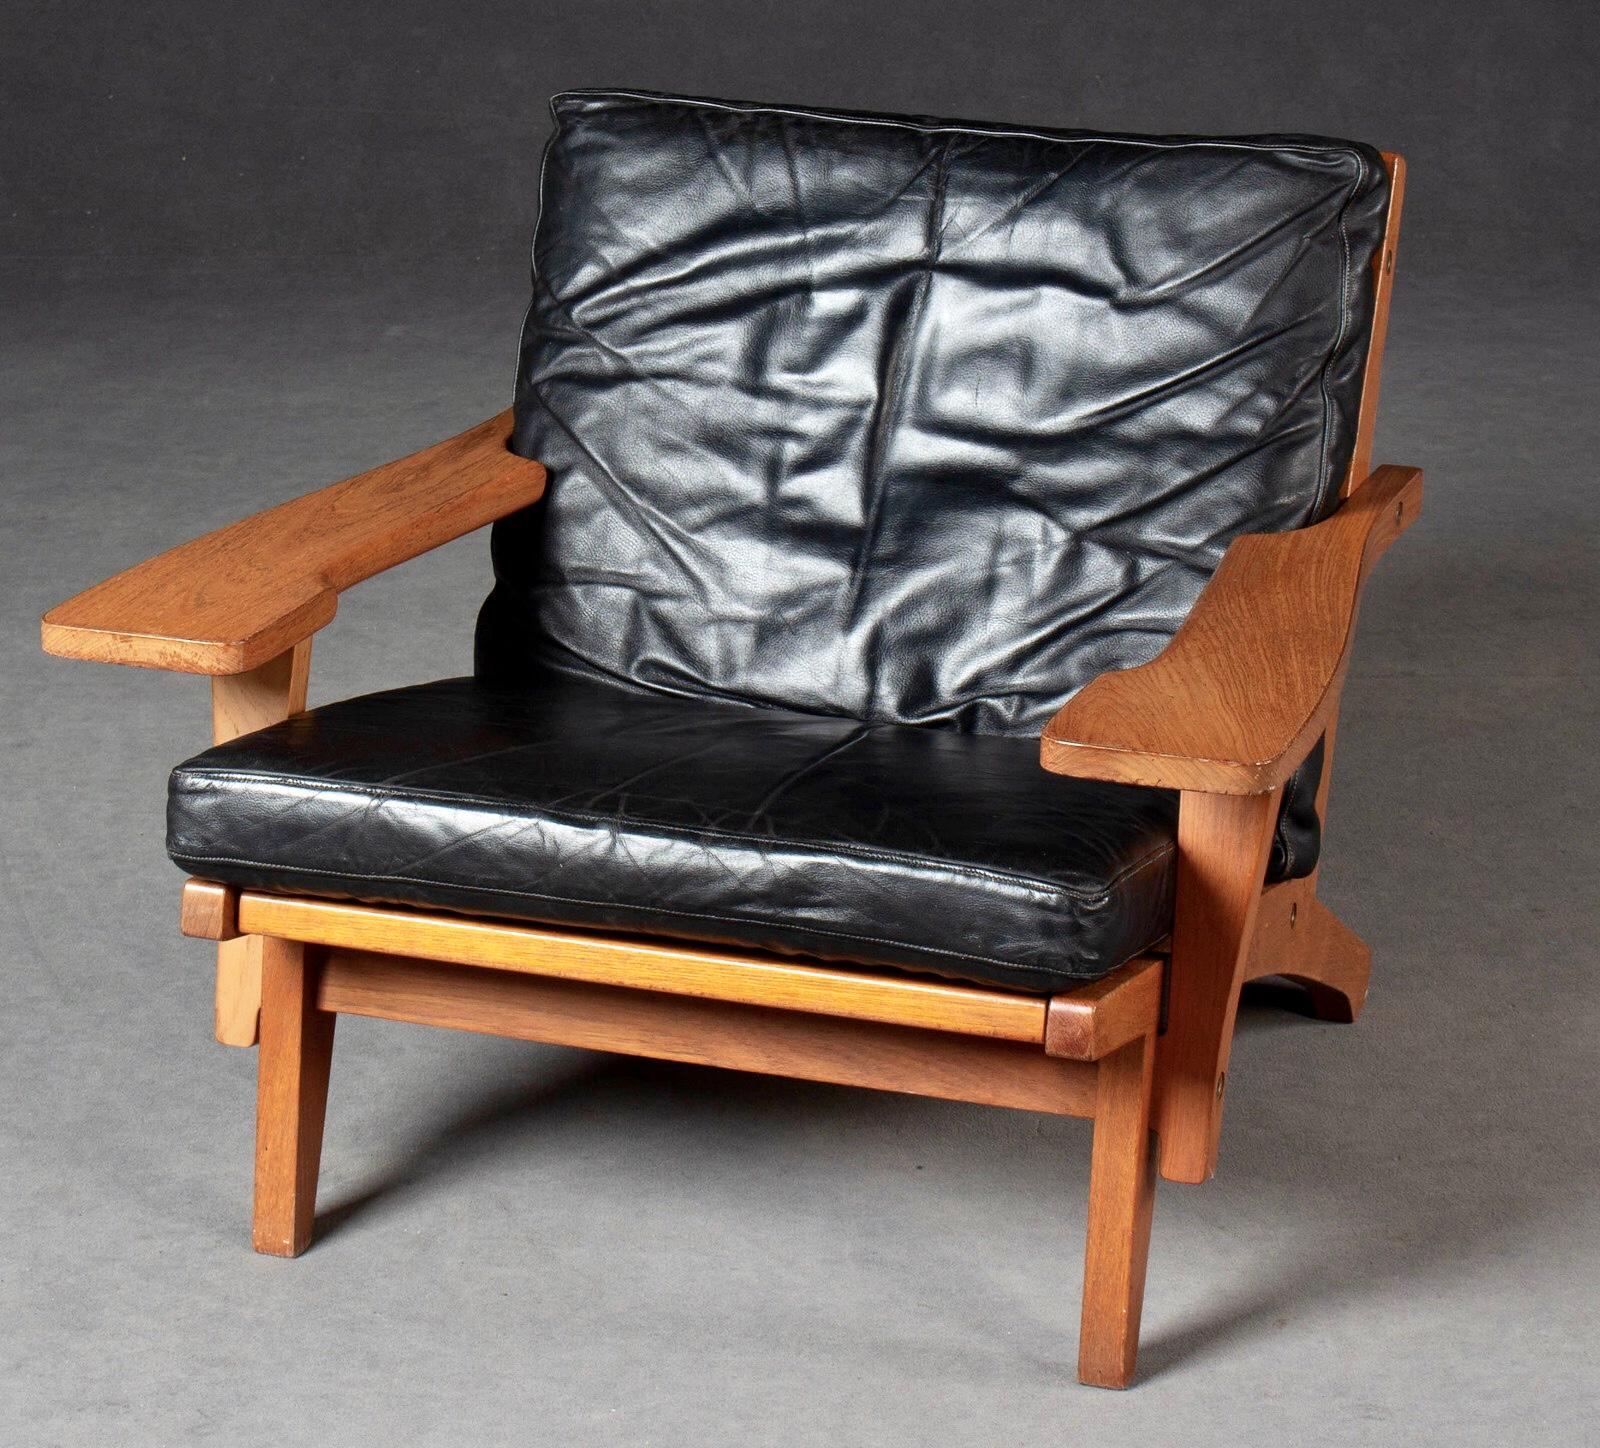 Iconic Danish Hans J Wegner GE-375 lounge chair, made in teak frame with black leather upholstery. Early production from 1960s, burn stamped by GETAMA Gedsted, Denmark.